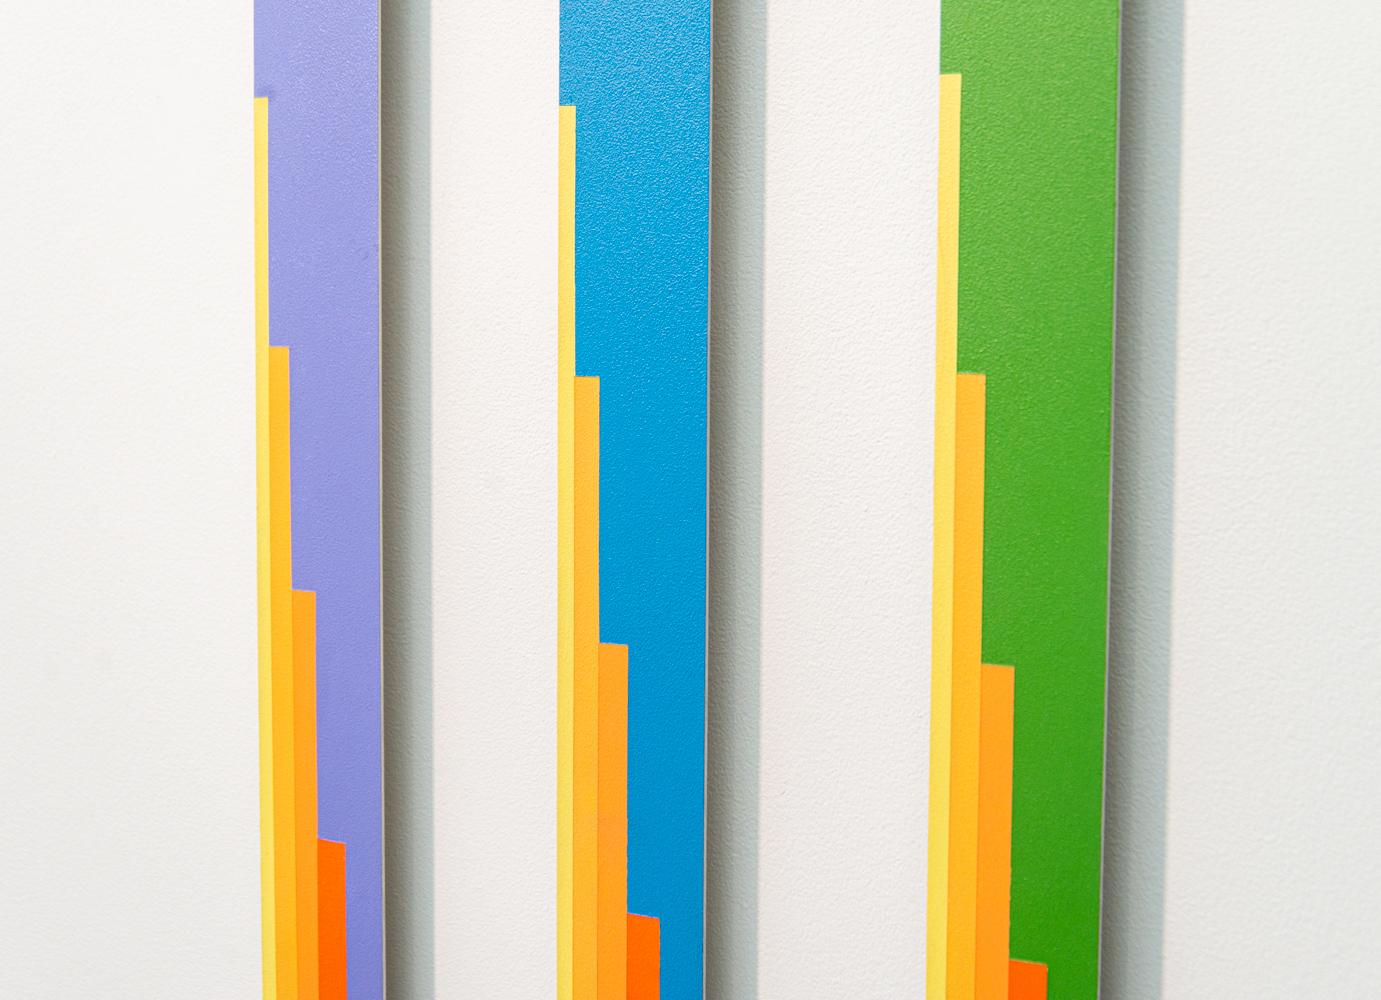 TTH 6.2 Trio - tall, narrow, playful, geometric abstract, acrylic on aluminum - Beige Abstract Painting by Burton Kramer